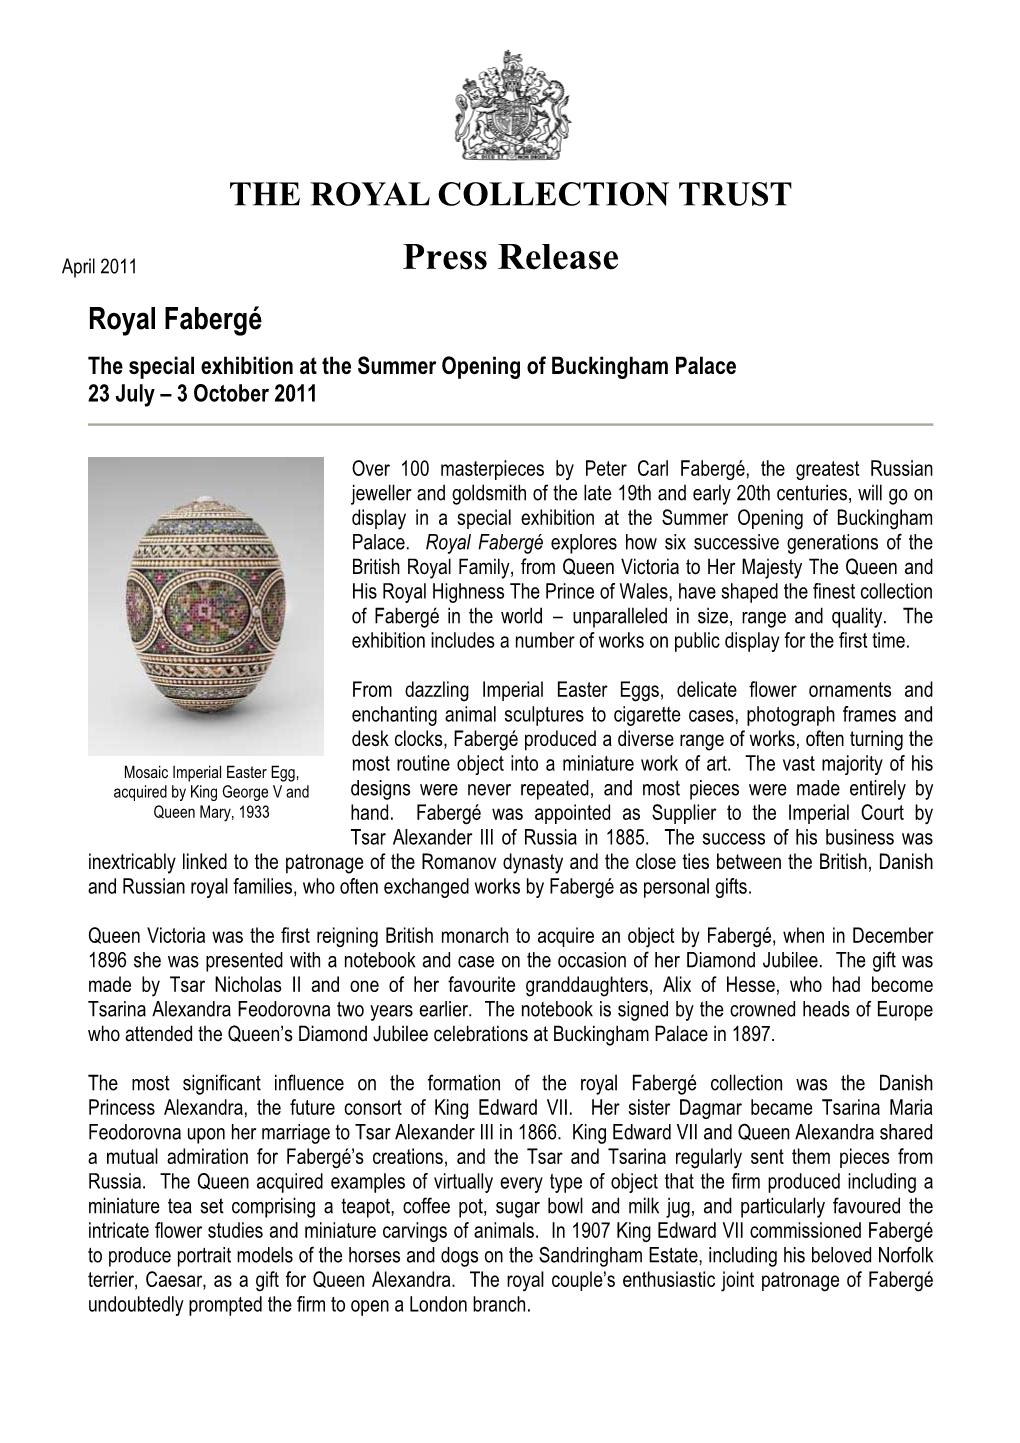 Royal Faberge Press Release